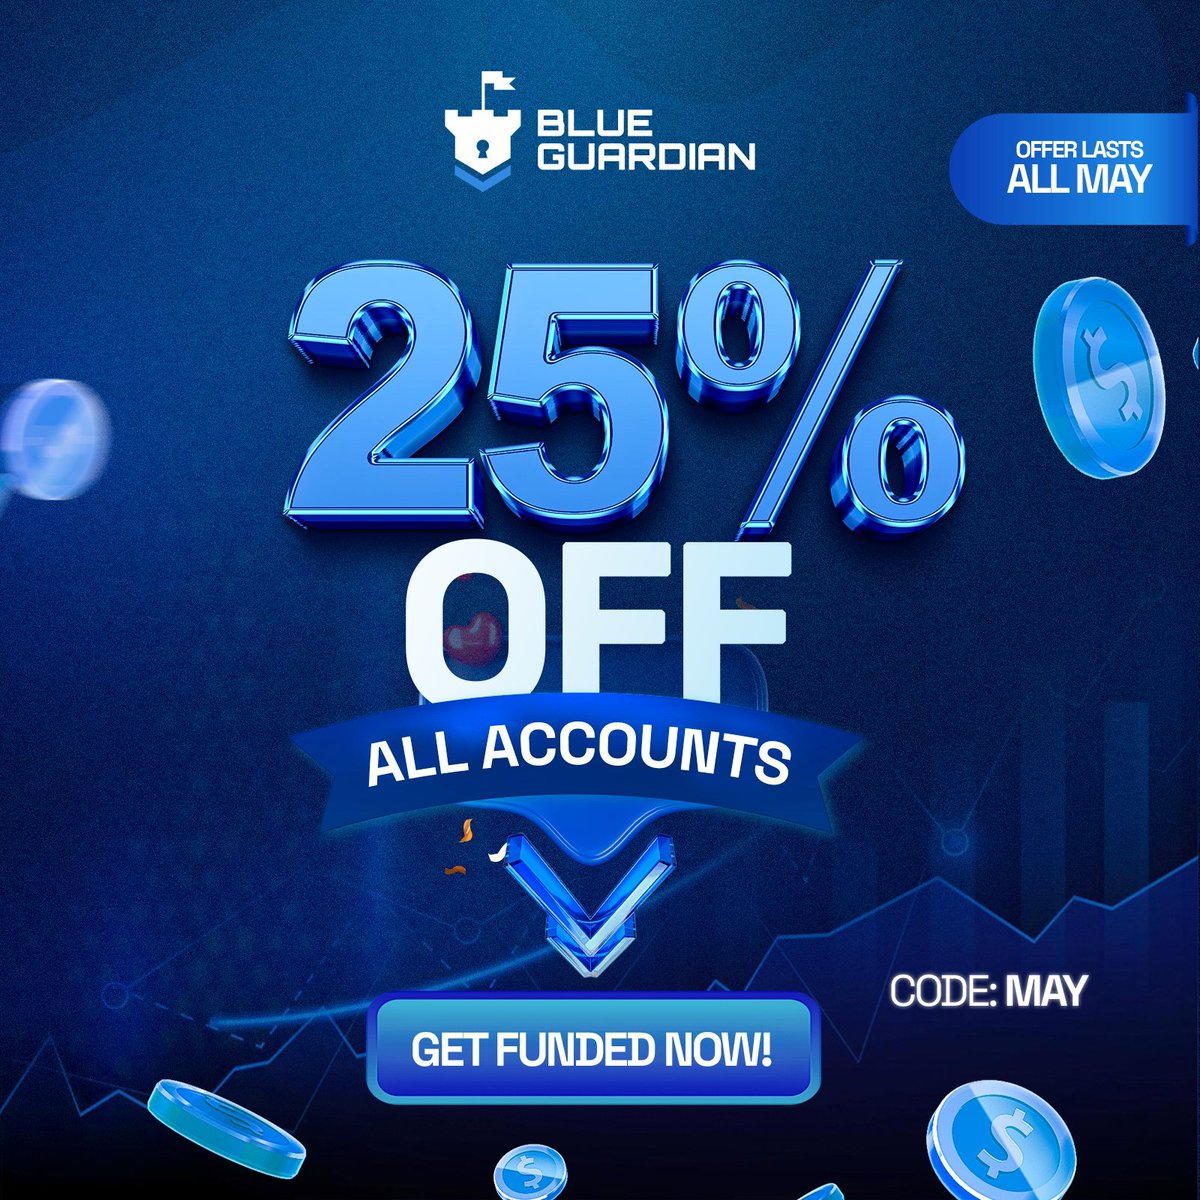 ⌛ Get 25% OFF all accounts for a limited time with code: MAY 🛡️ Bi-weekly payouts 🛡️ 85% profit split 🛡️ Guardian Protector Get funded now ➡️ blueguardian.com